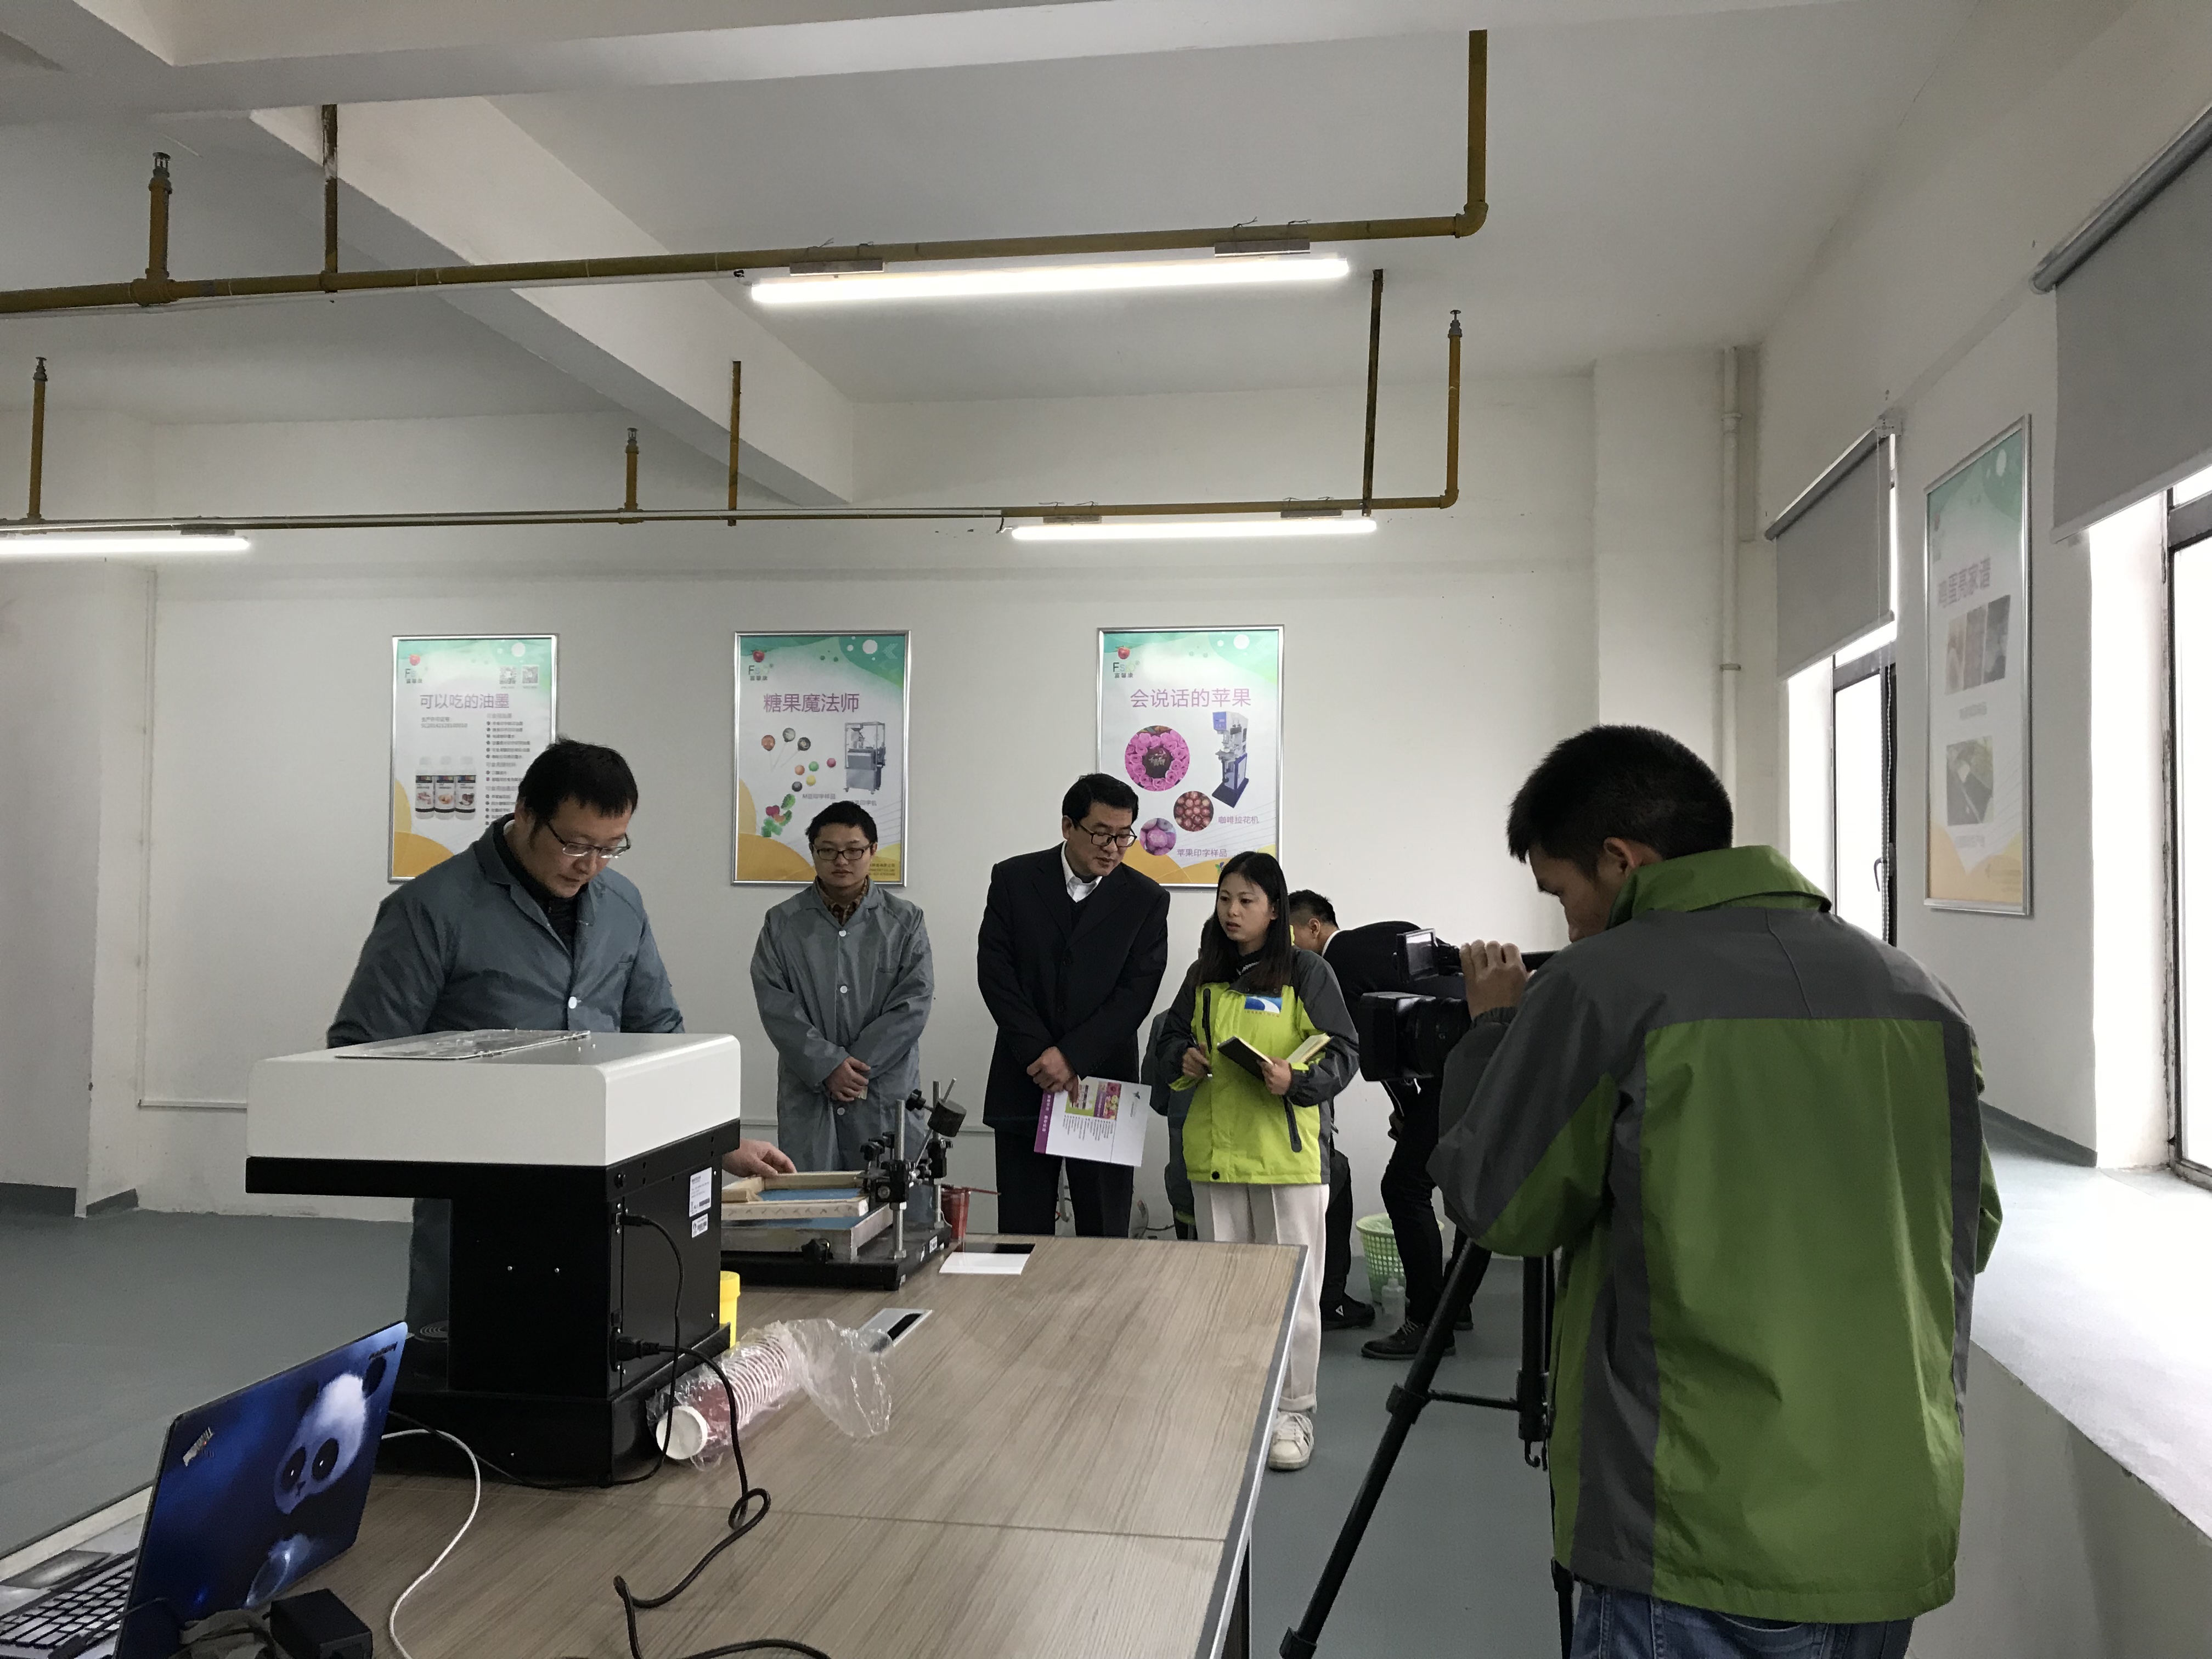 Hubei TV came to our office for an interview!